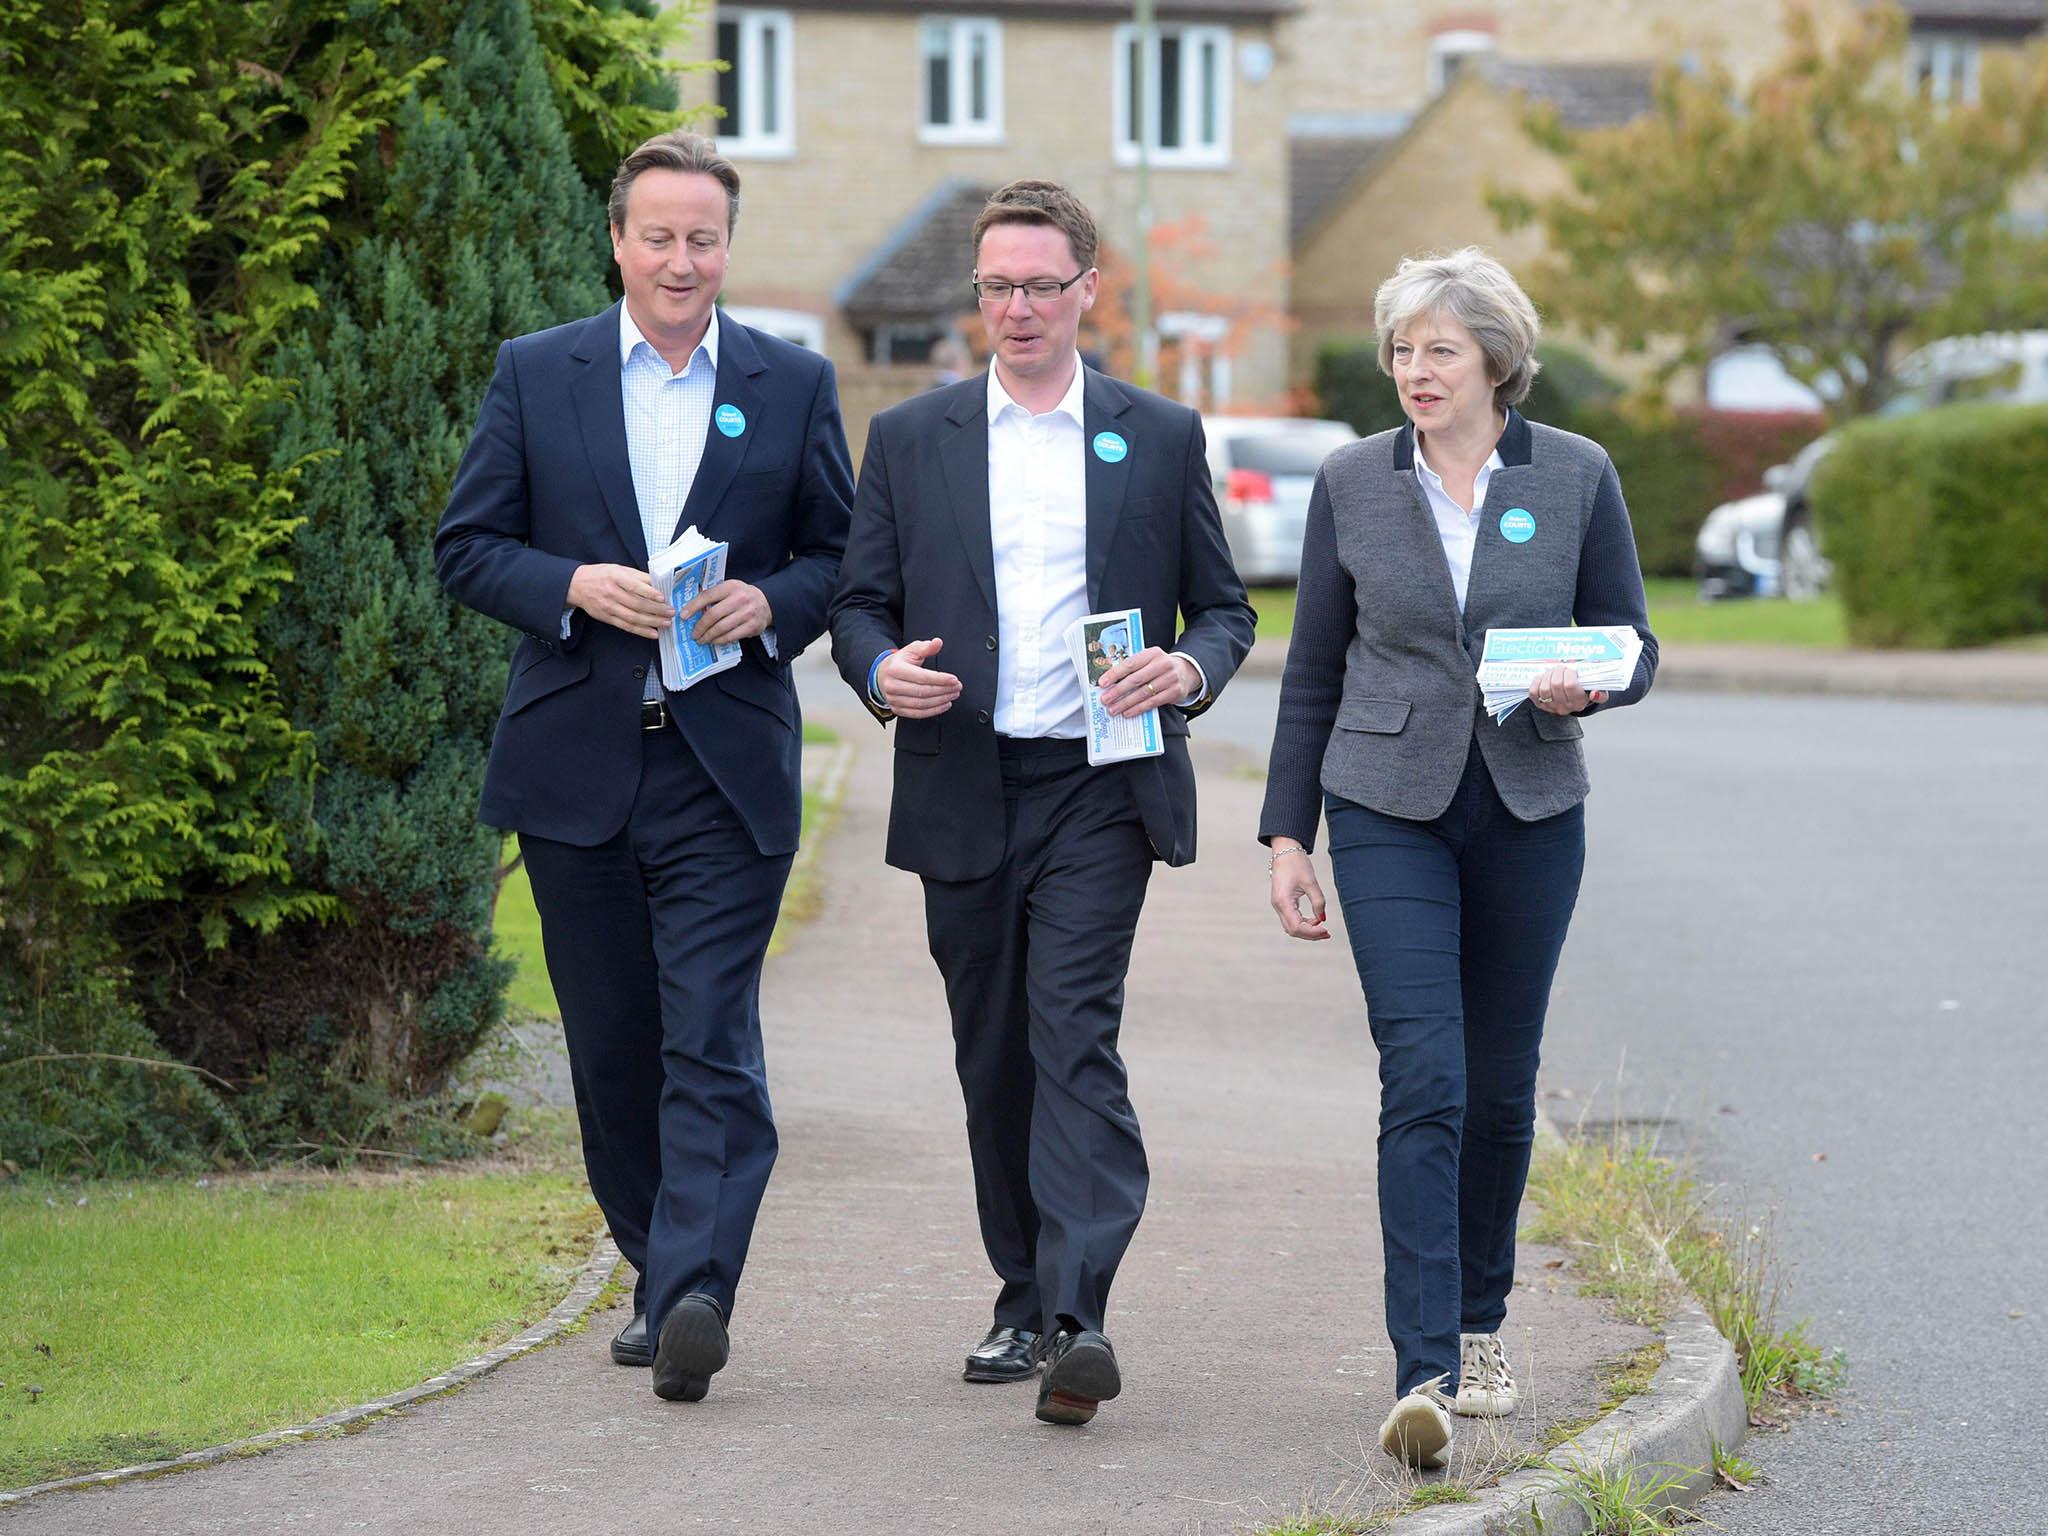 Prime Minister Theresa May campaigns with former PM David Cameron (left) and Robert Courts, the victorious Conservative candidate for the Witney by-election